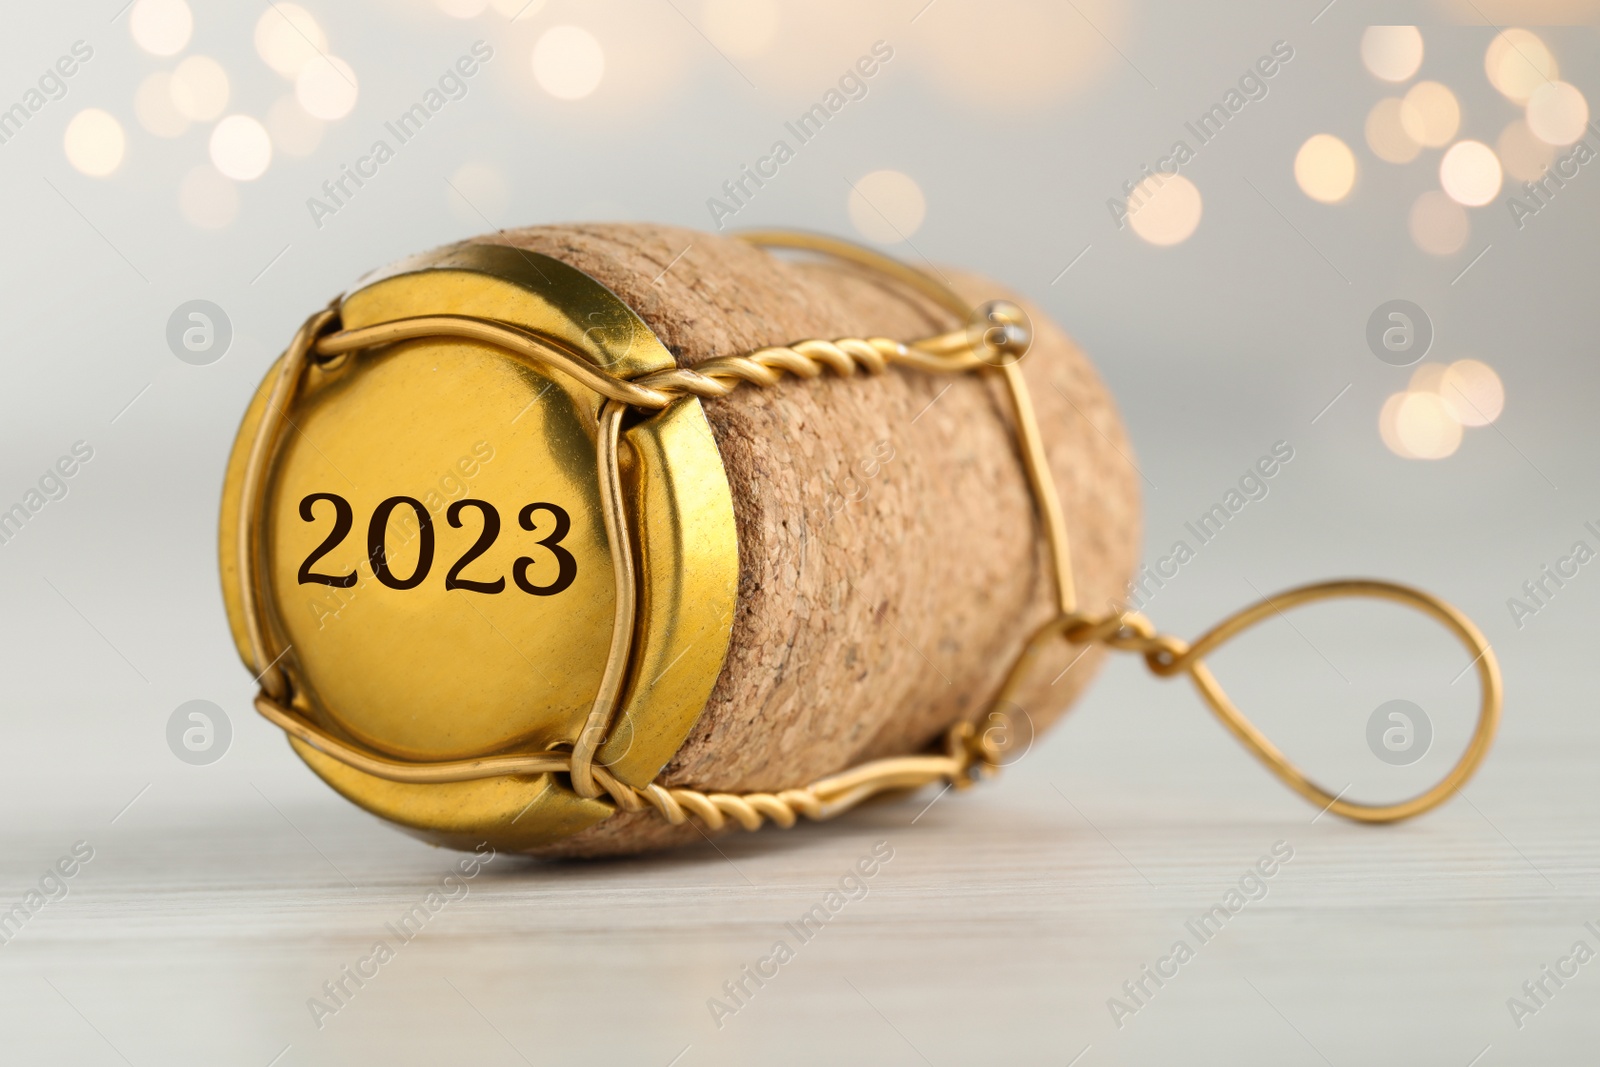 Image of Cork of sparkling wine and muselet cap with engraving 2023 on table against blurred festive lights, closeup. Bokeh effect